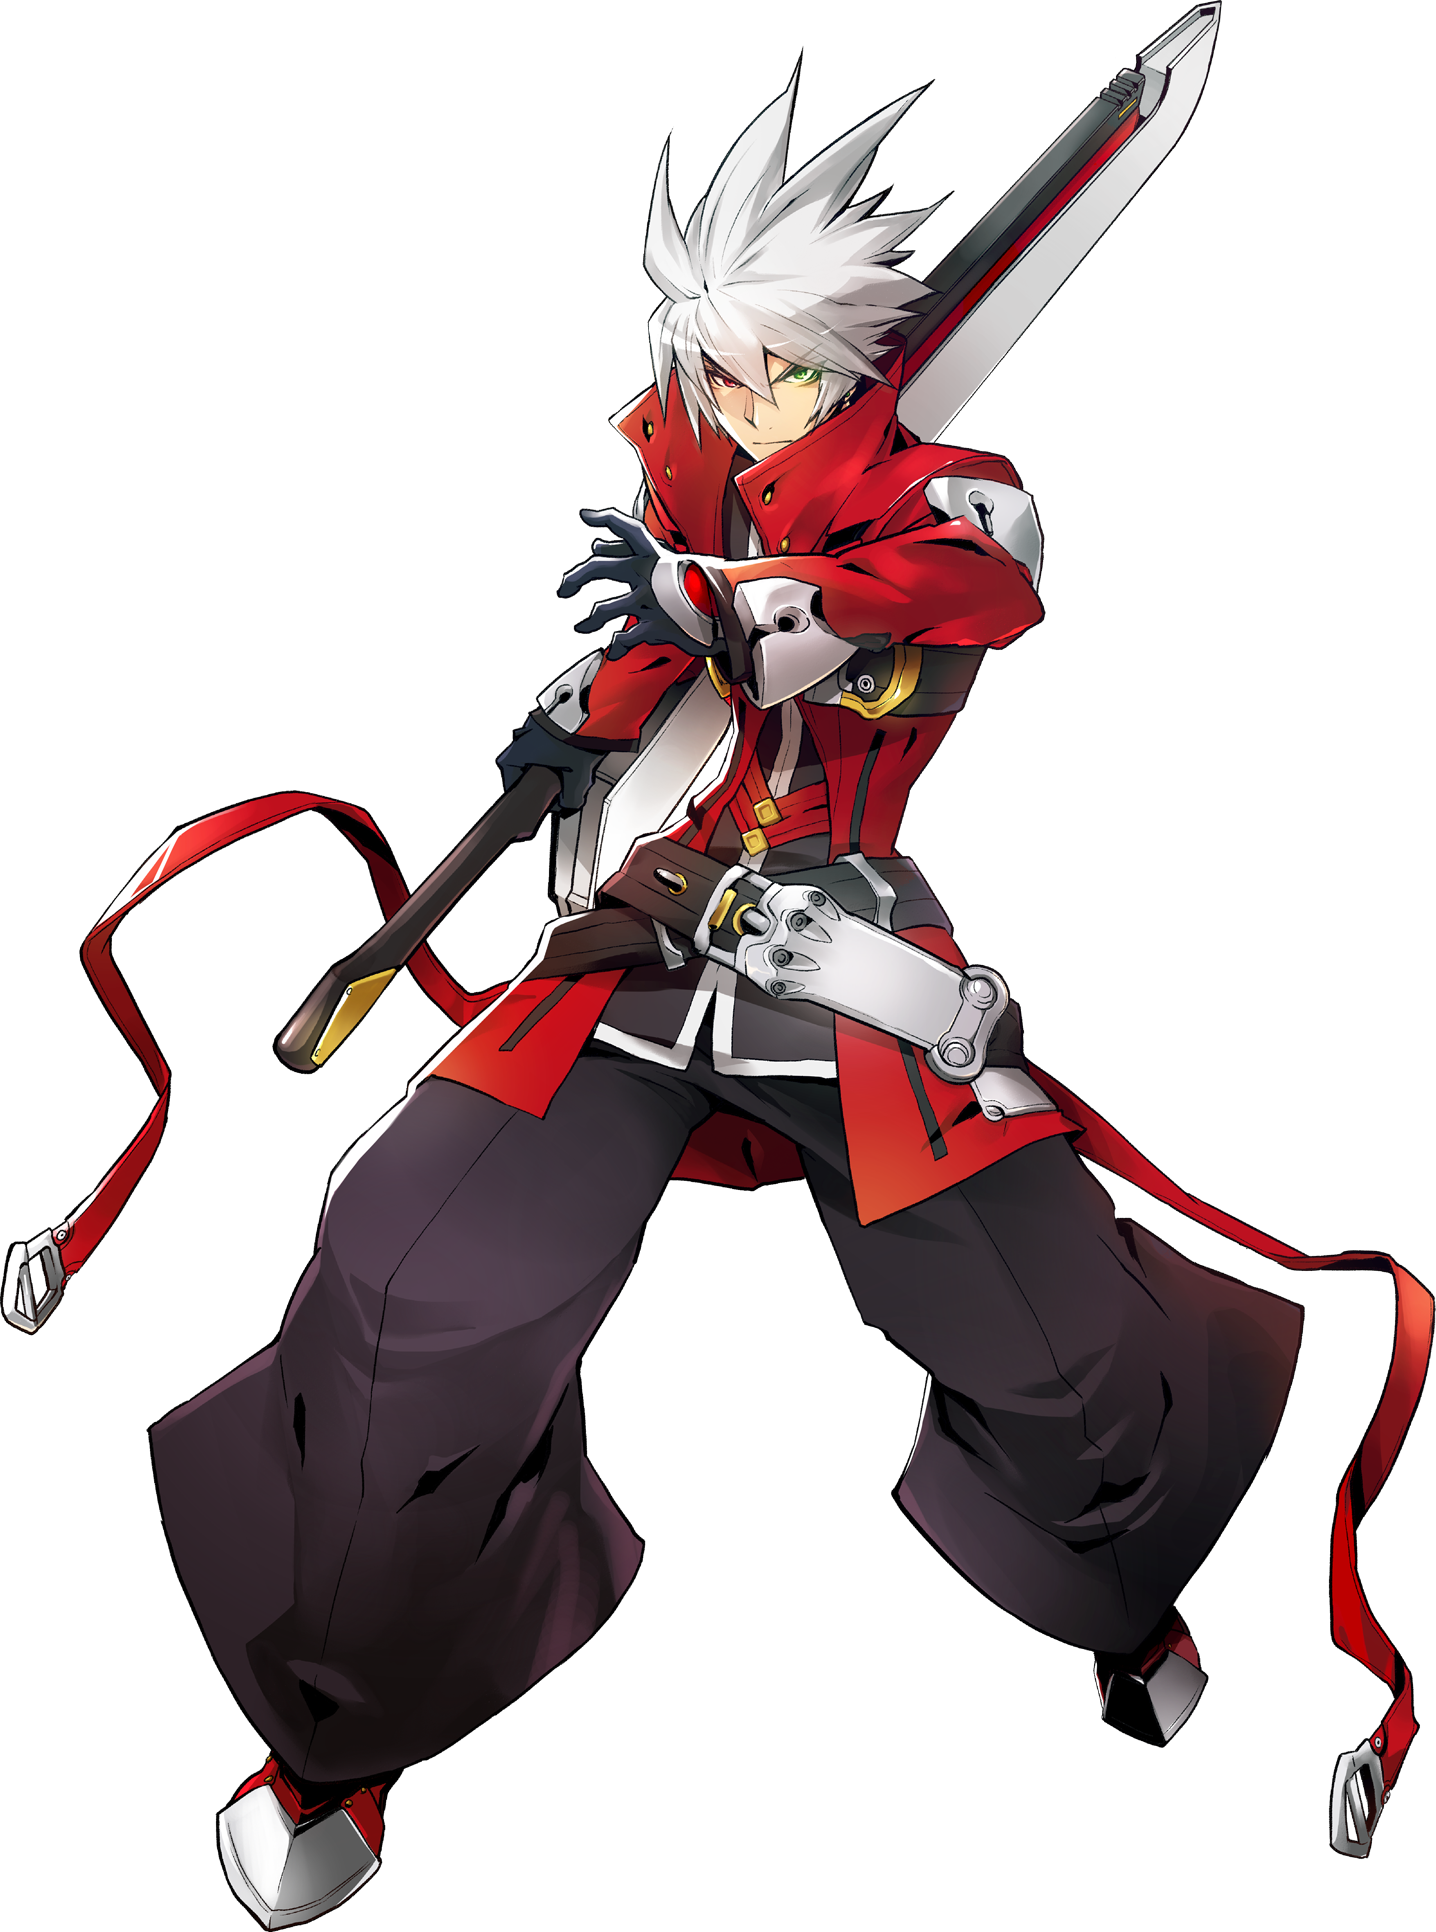 Ragna_the_Bloodedge_%28Centralfiction%2C_Character_Select_Artwork%29.png